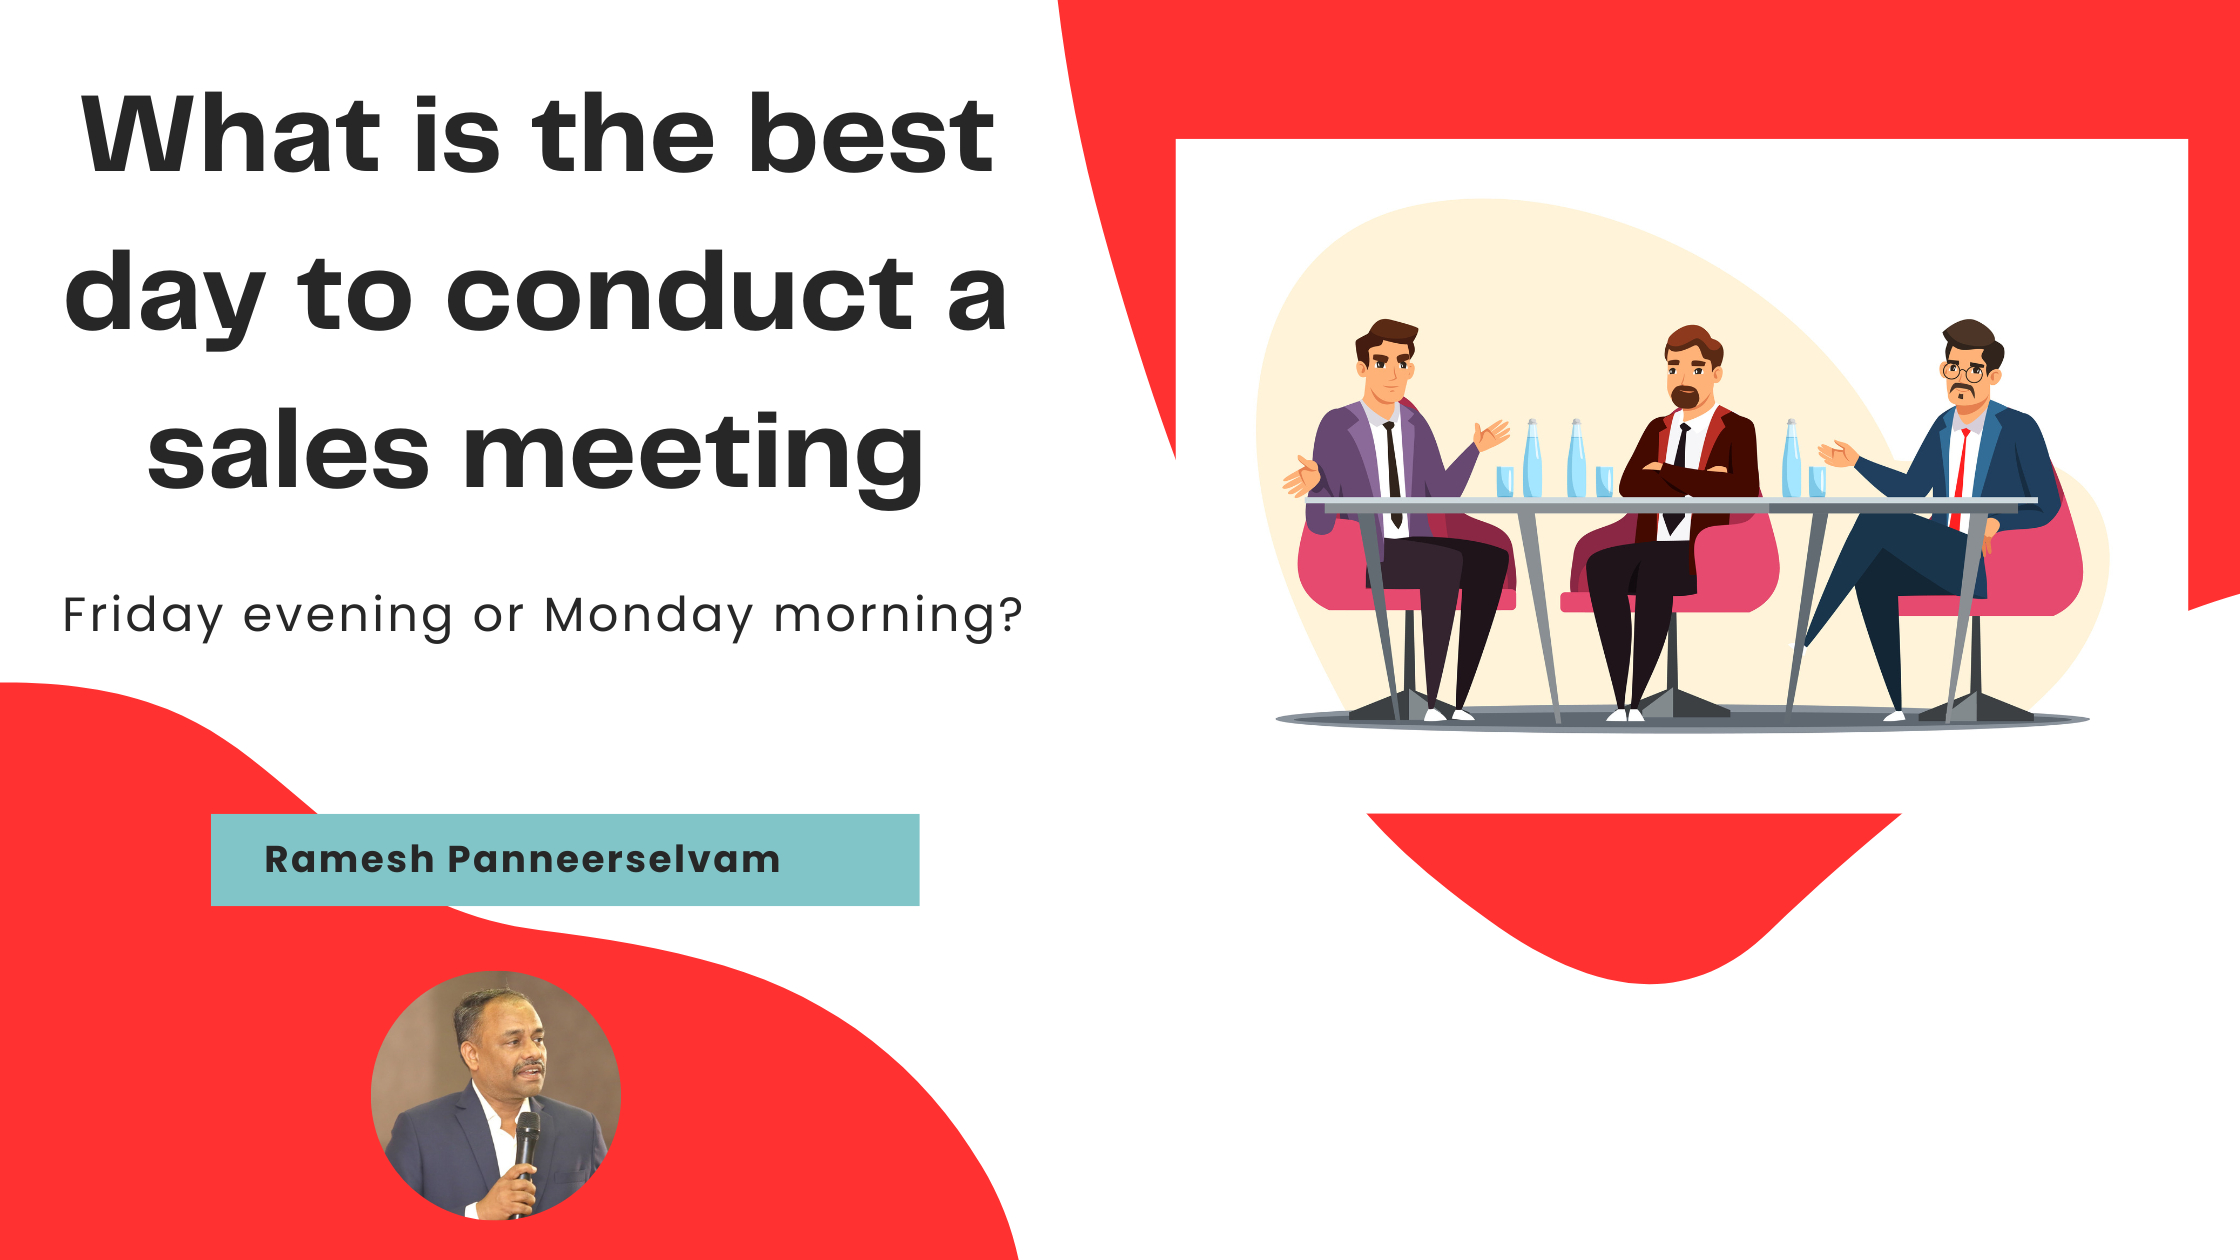 What is the best day to conduct a sales meeting